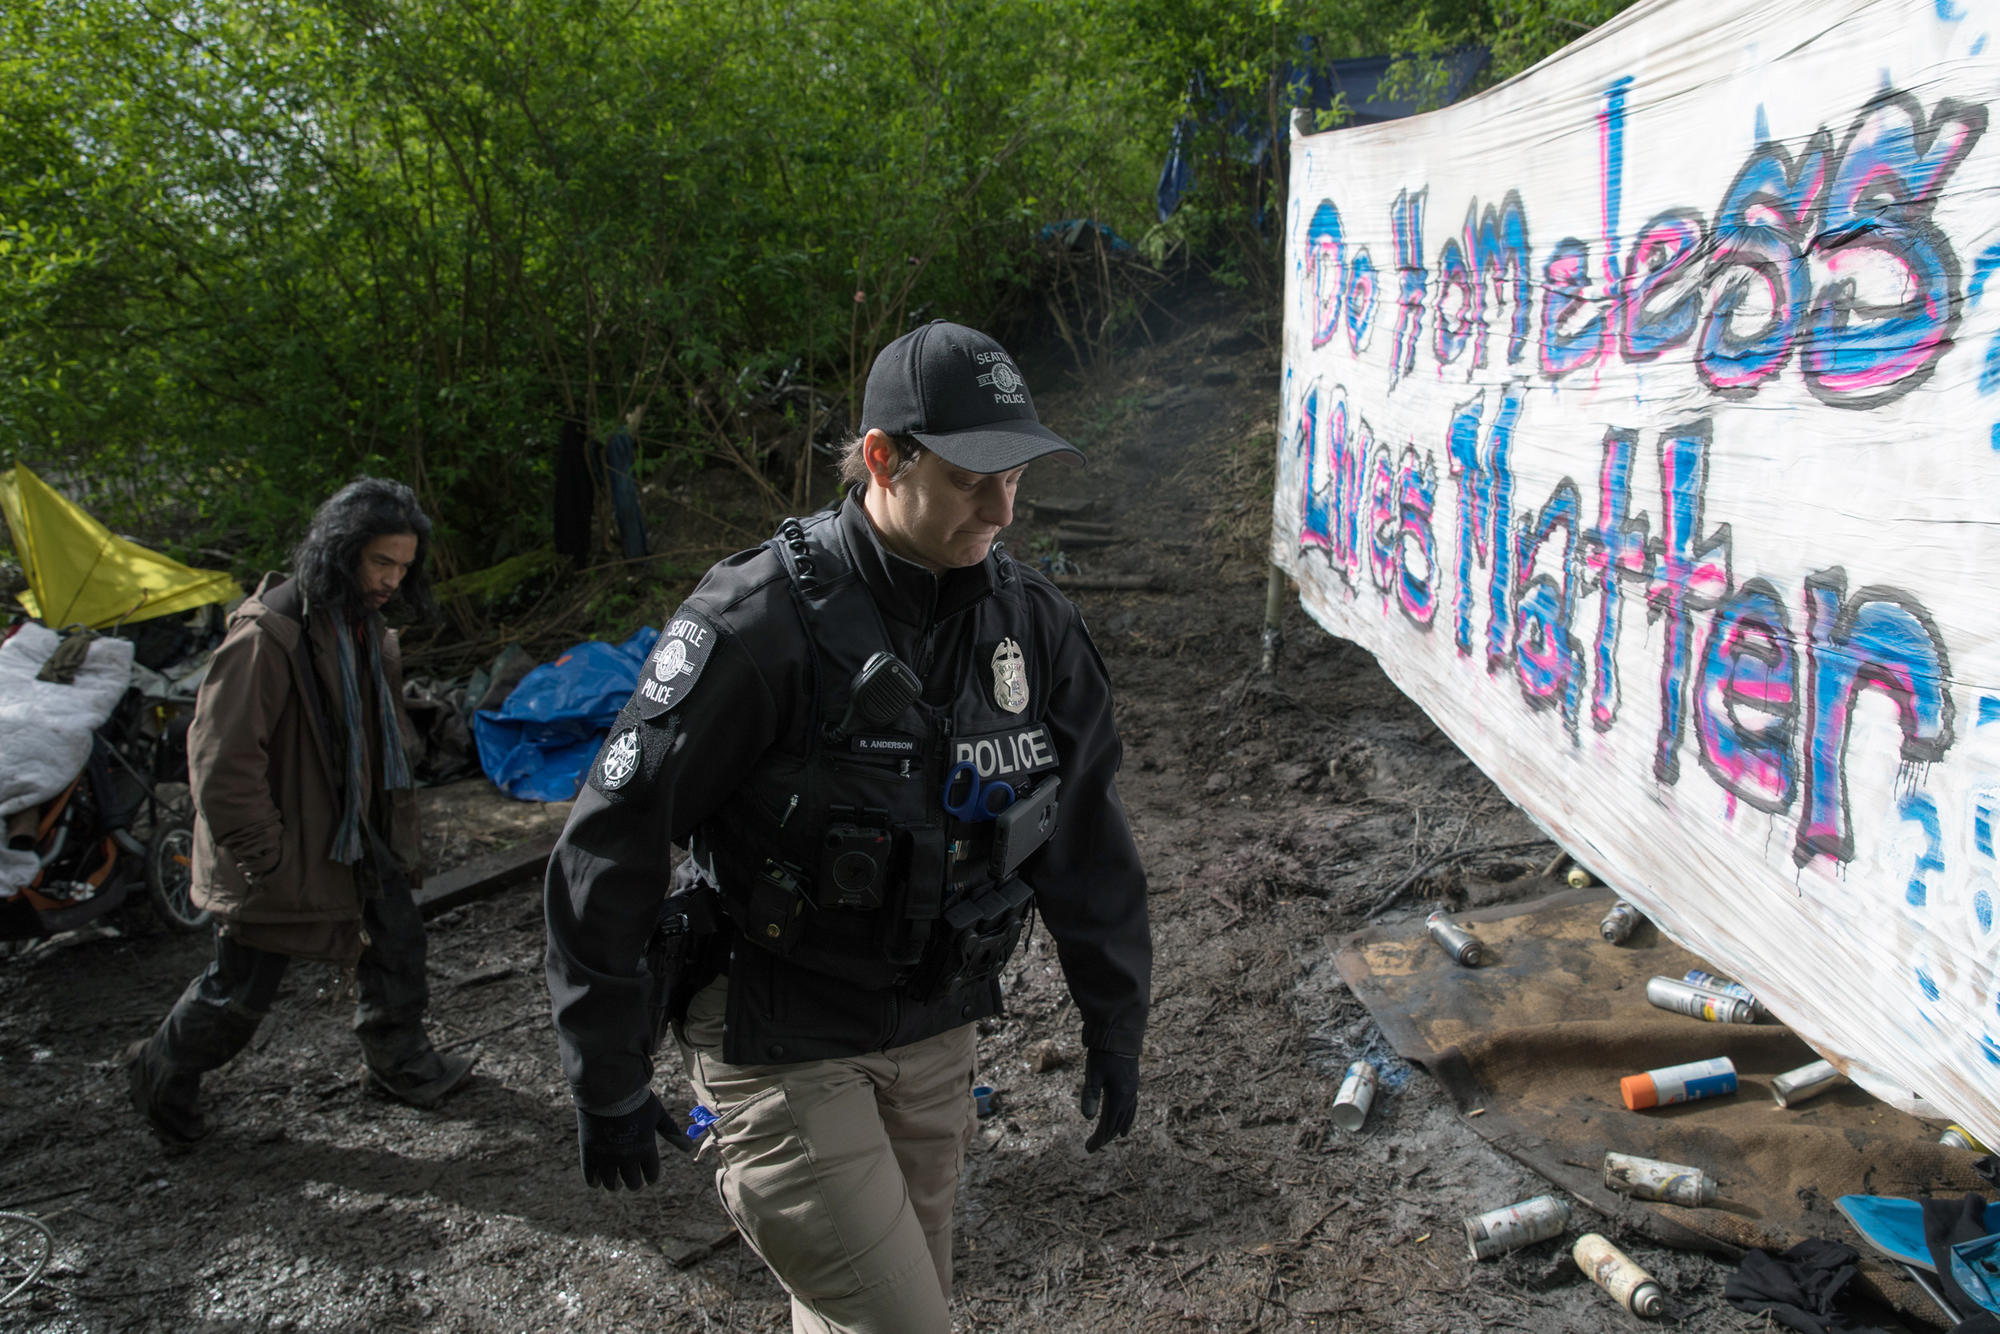 A Seattle Police Department officer is seen walking into the encampment with a tenant, during a sweep of Ravenna Woods homeless encampment near Seattle's University Village neighborhood, Tuesday, April 17.